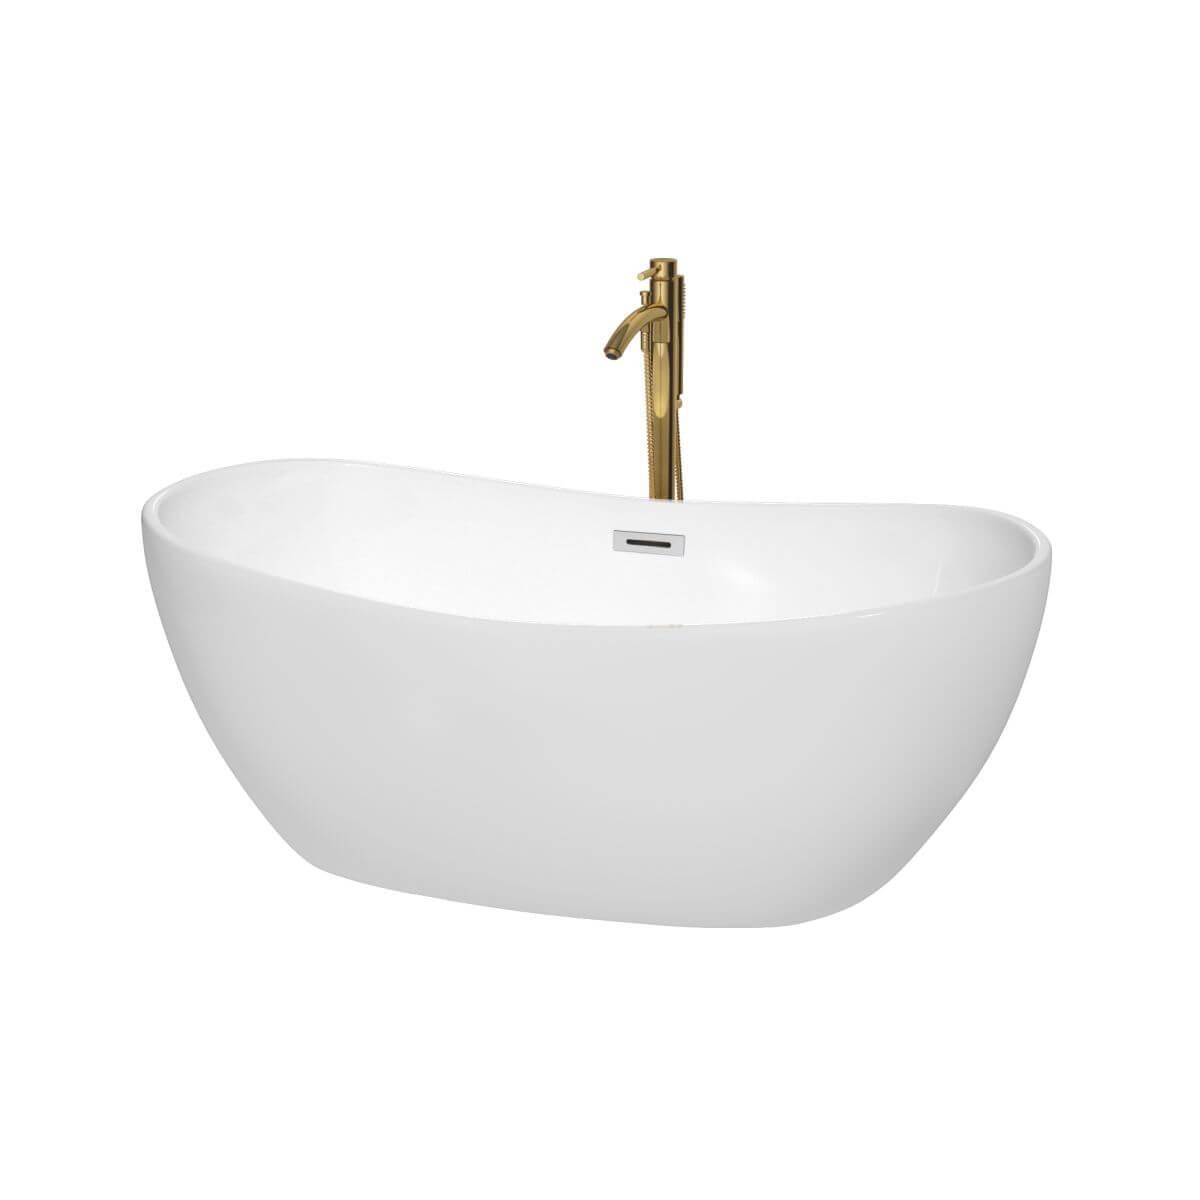 Wyndham Collection Rebecca 60 inch Freestanding Bathtub in White with Polished Chrome Trim and Floor Mounted Faucet in Brushed Gold - WCOBT101460PCATPGD